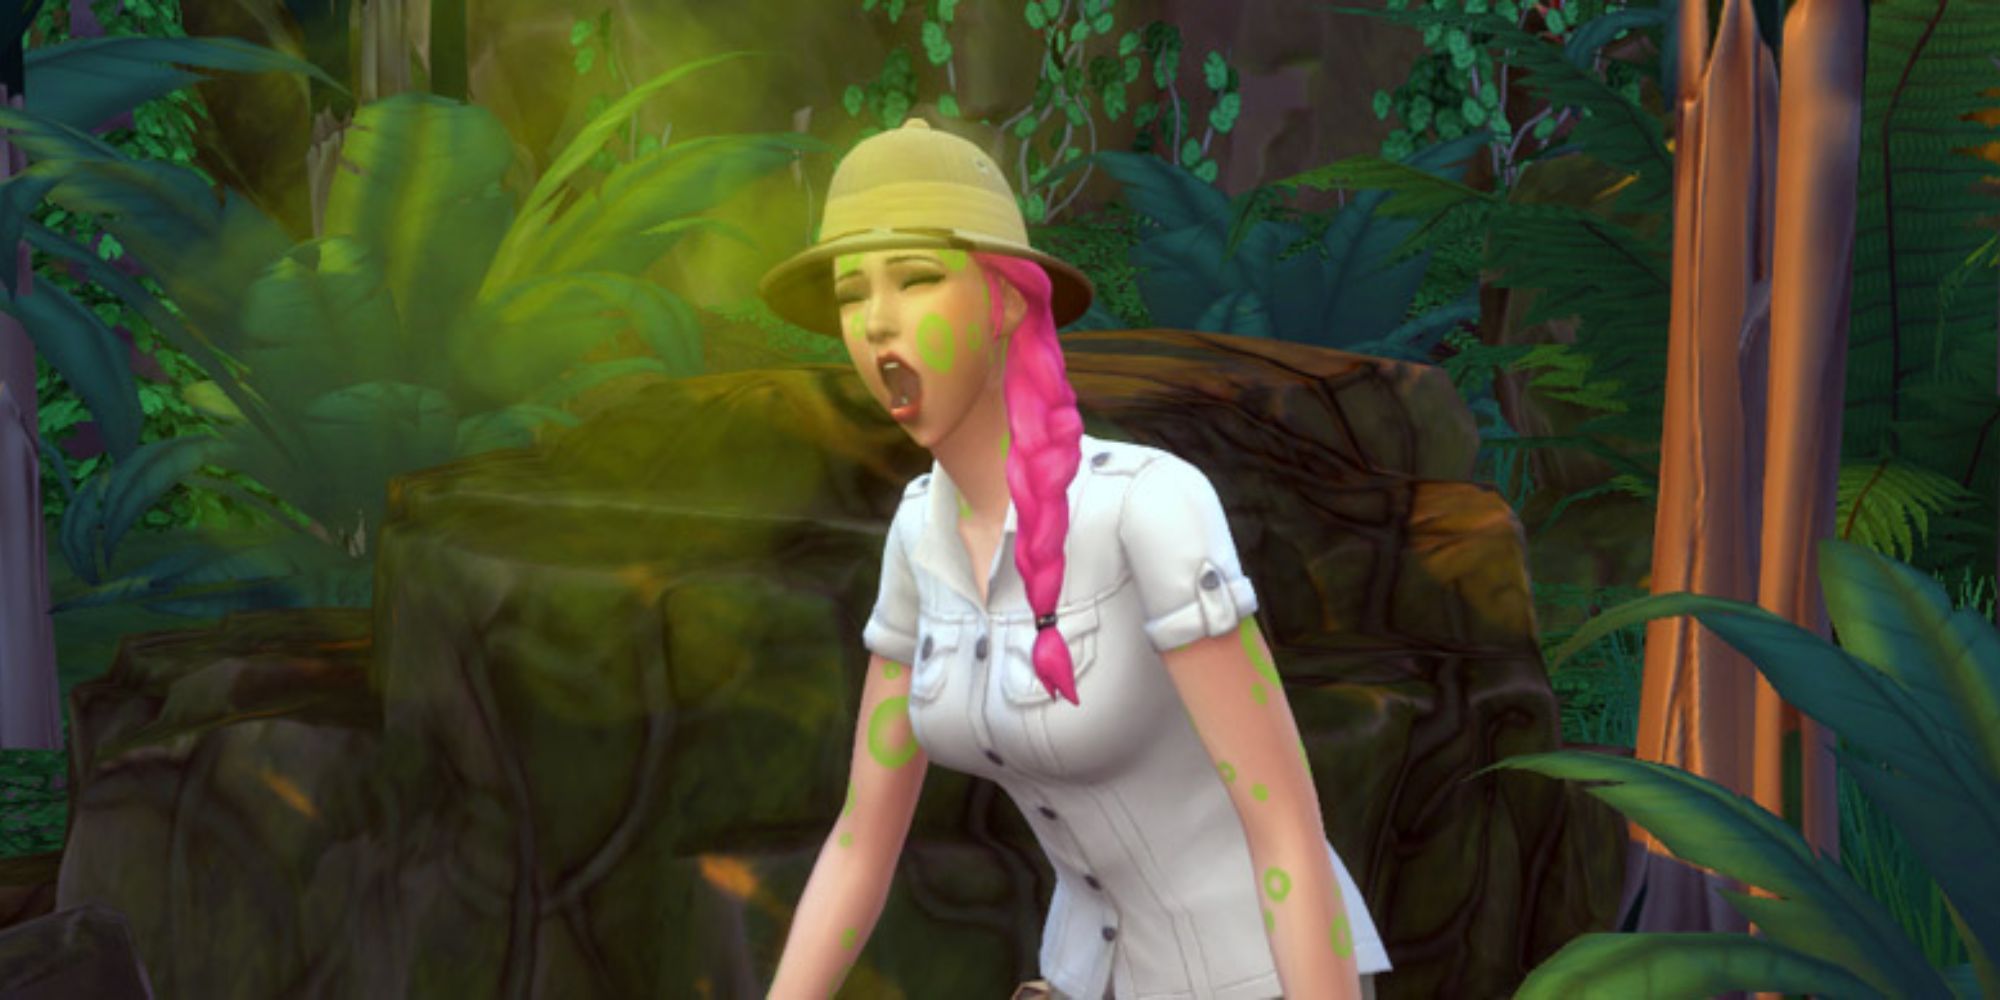 The Sims 4 Poisoned Sim